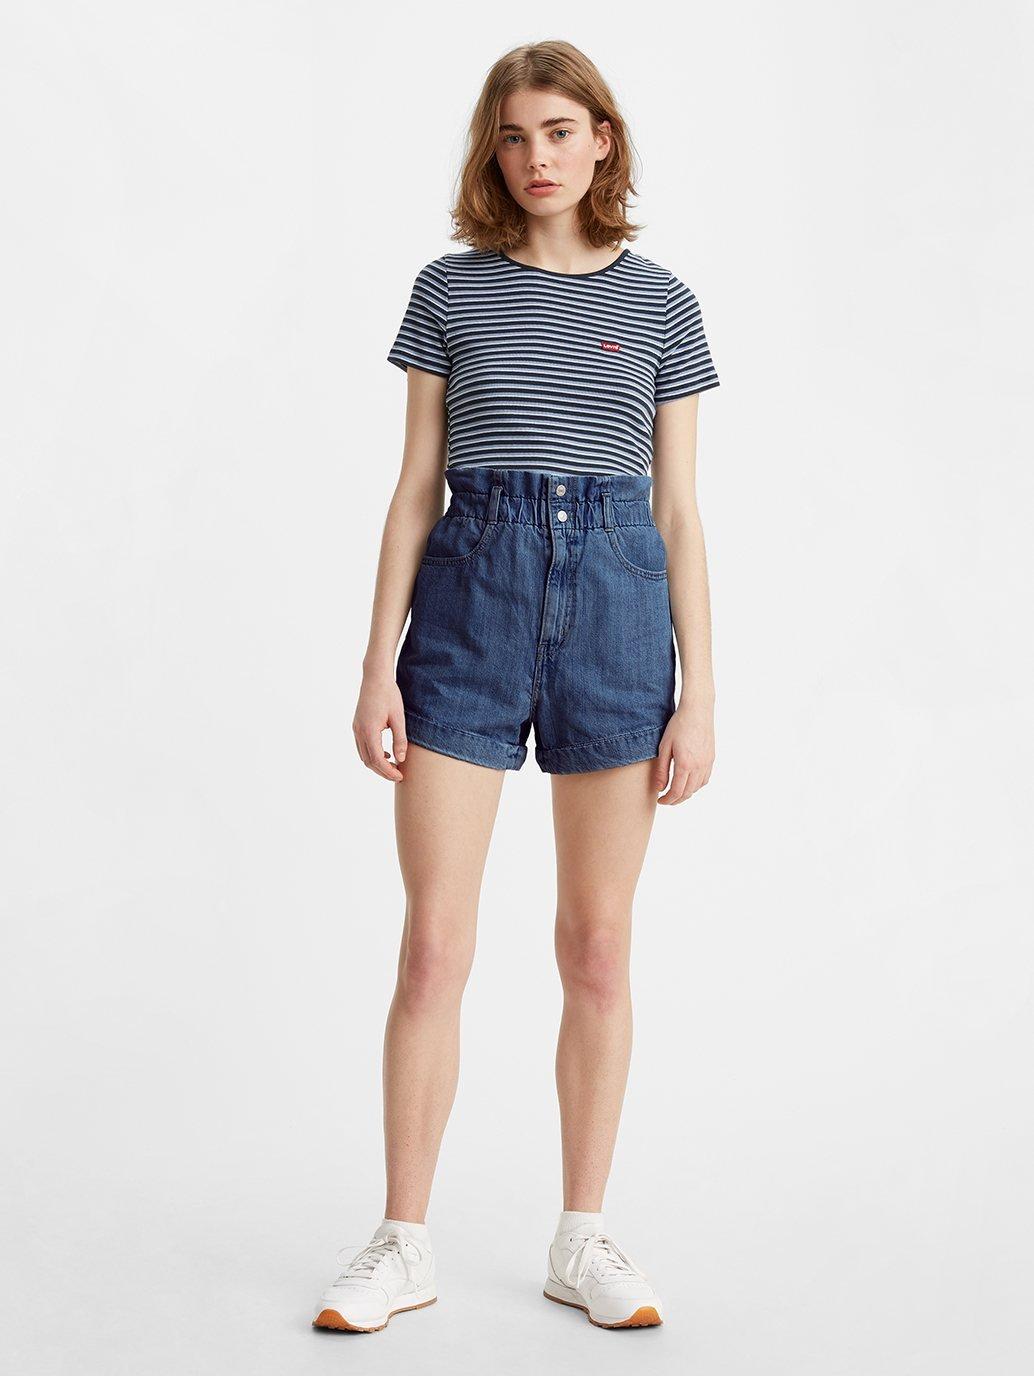 levis malaysia high waisted paperbag shorts 376800001 10 Model Front